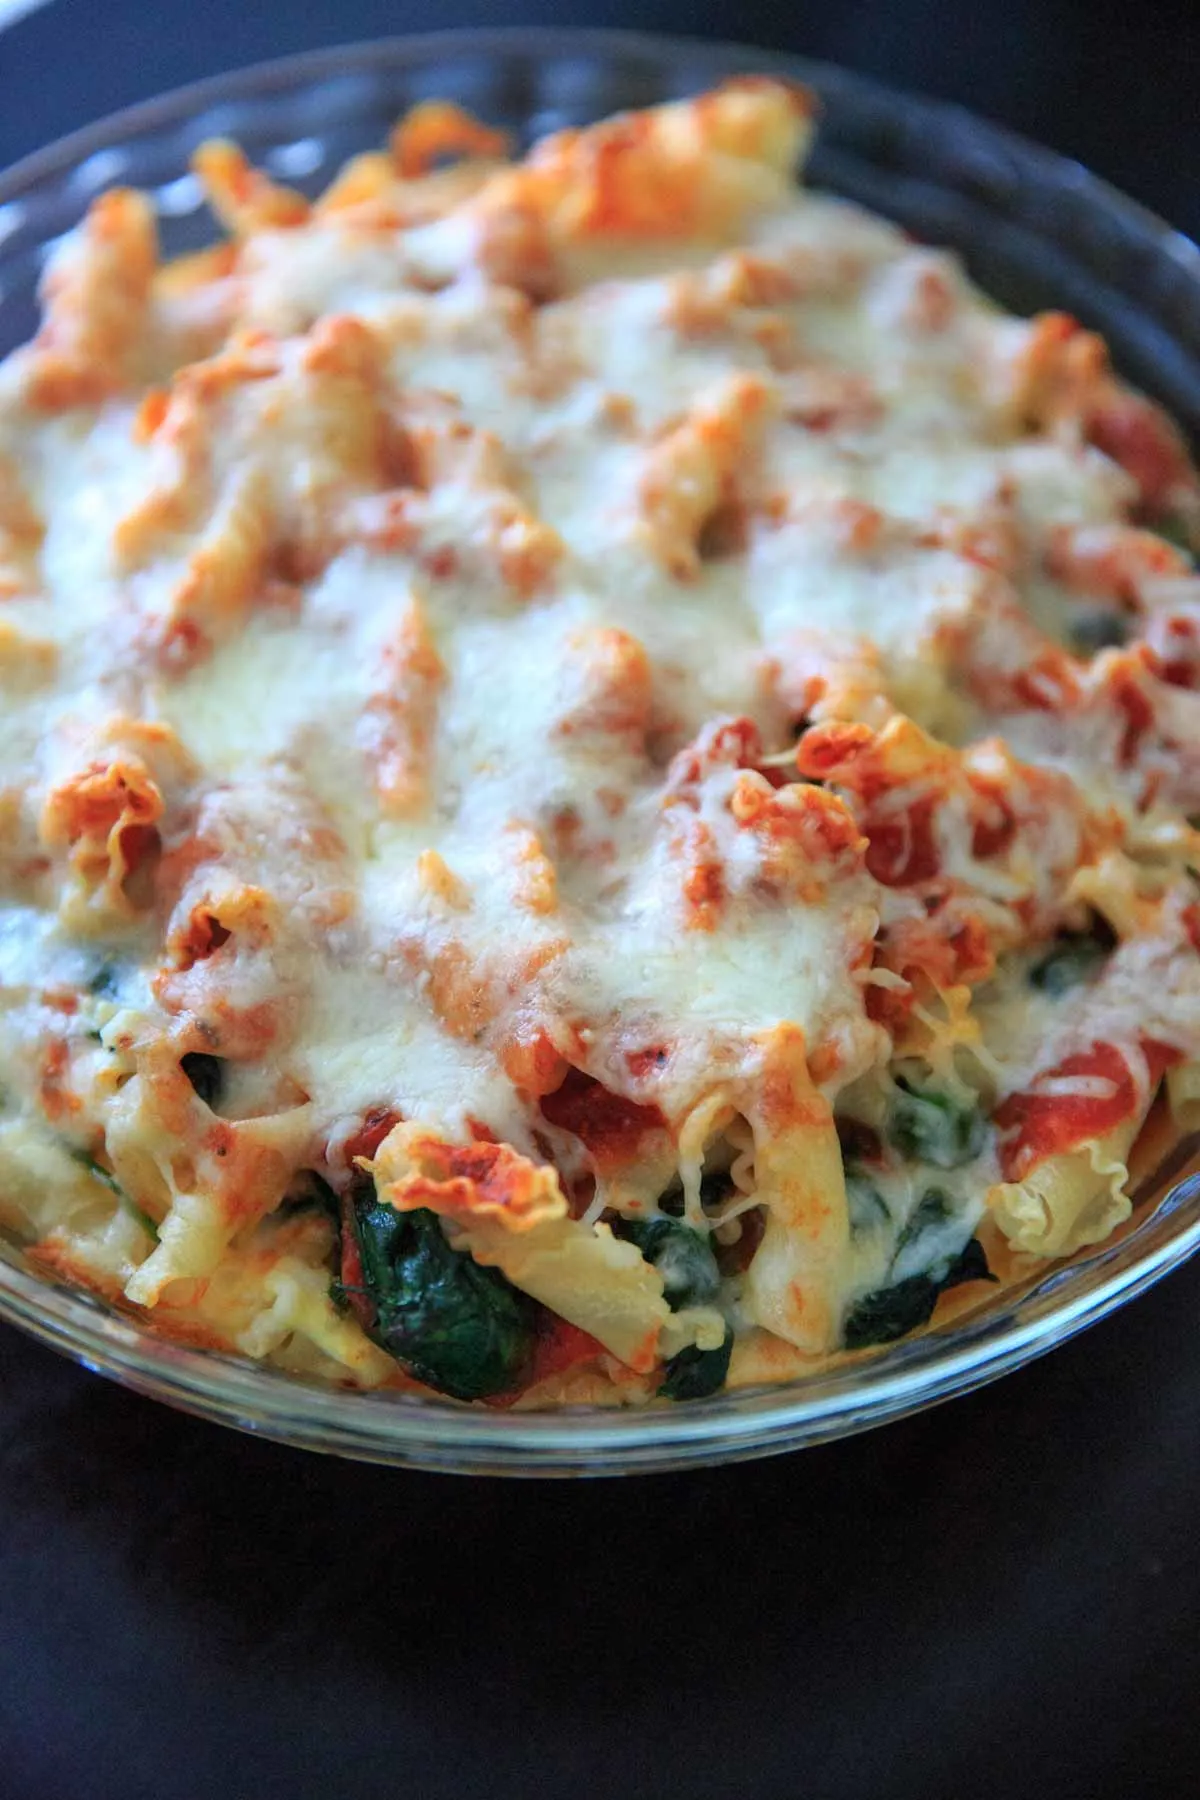 Spinach Baked Ziti Recipe - A meatless pasta casserole with greens that is sure to be a family favorite! Adapted from my grandma's baked ziti recipe and scaled down to 4 (generous) servings.